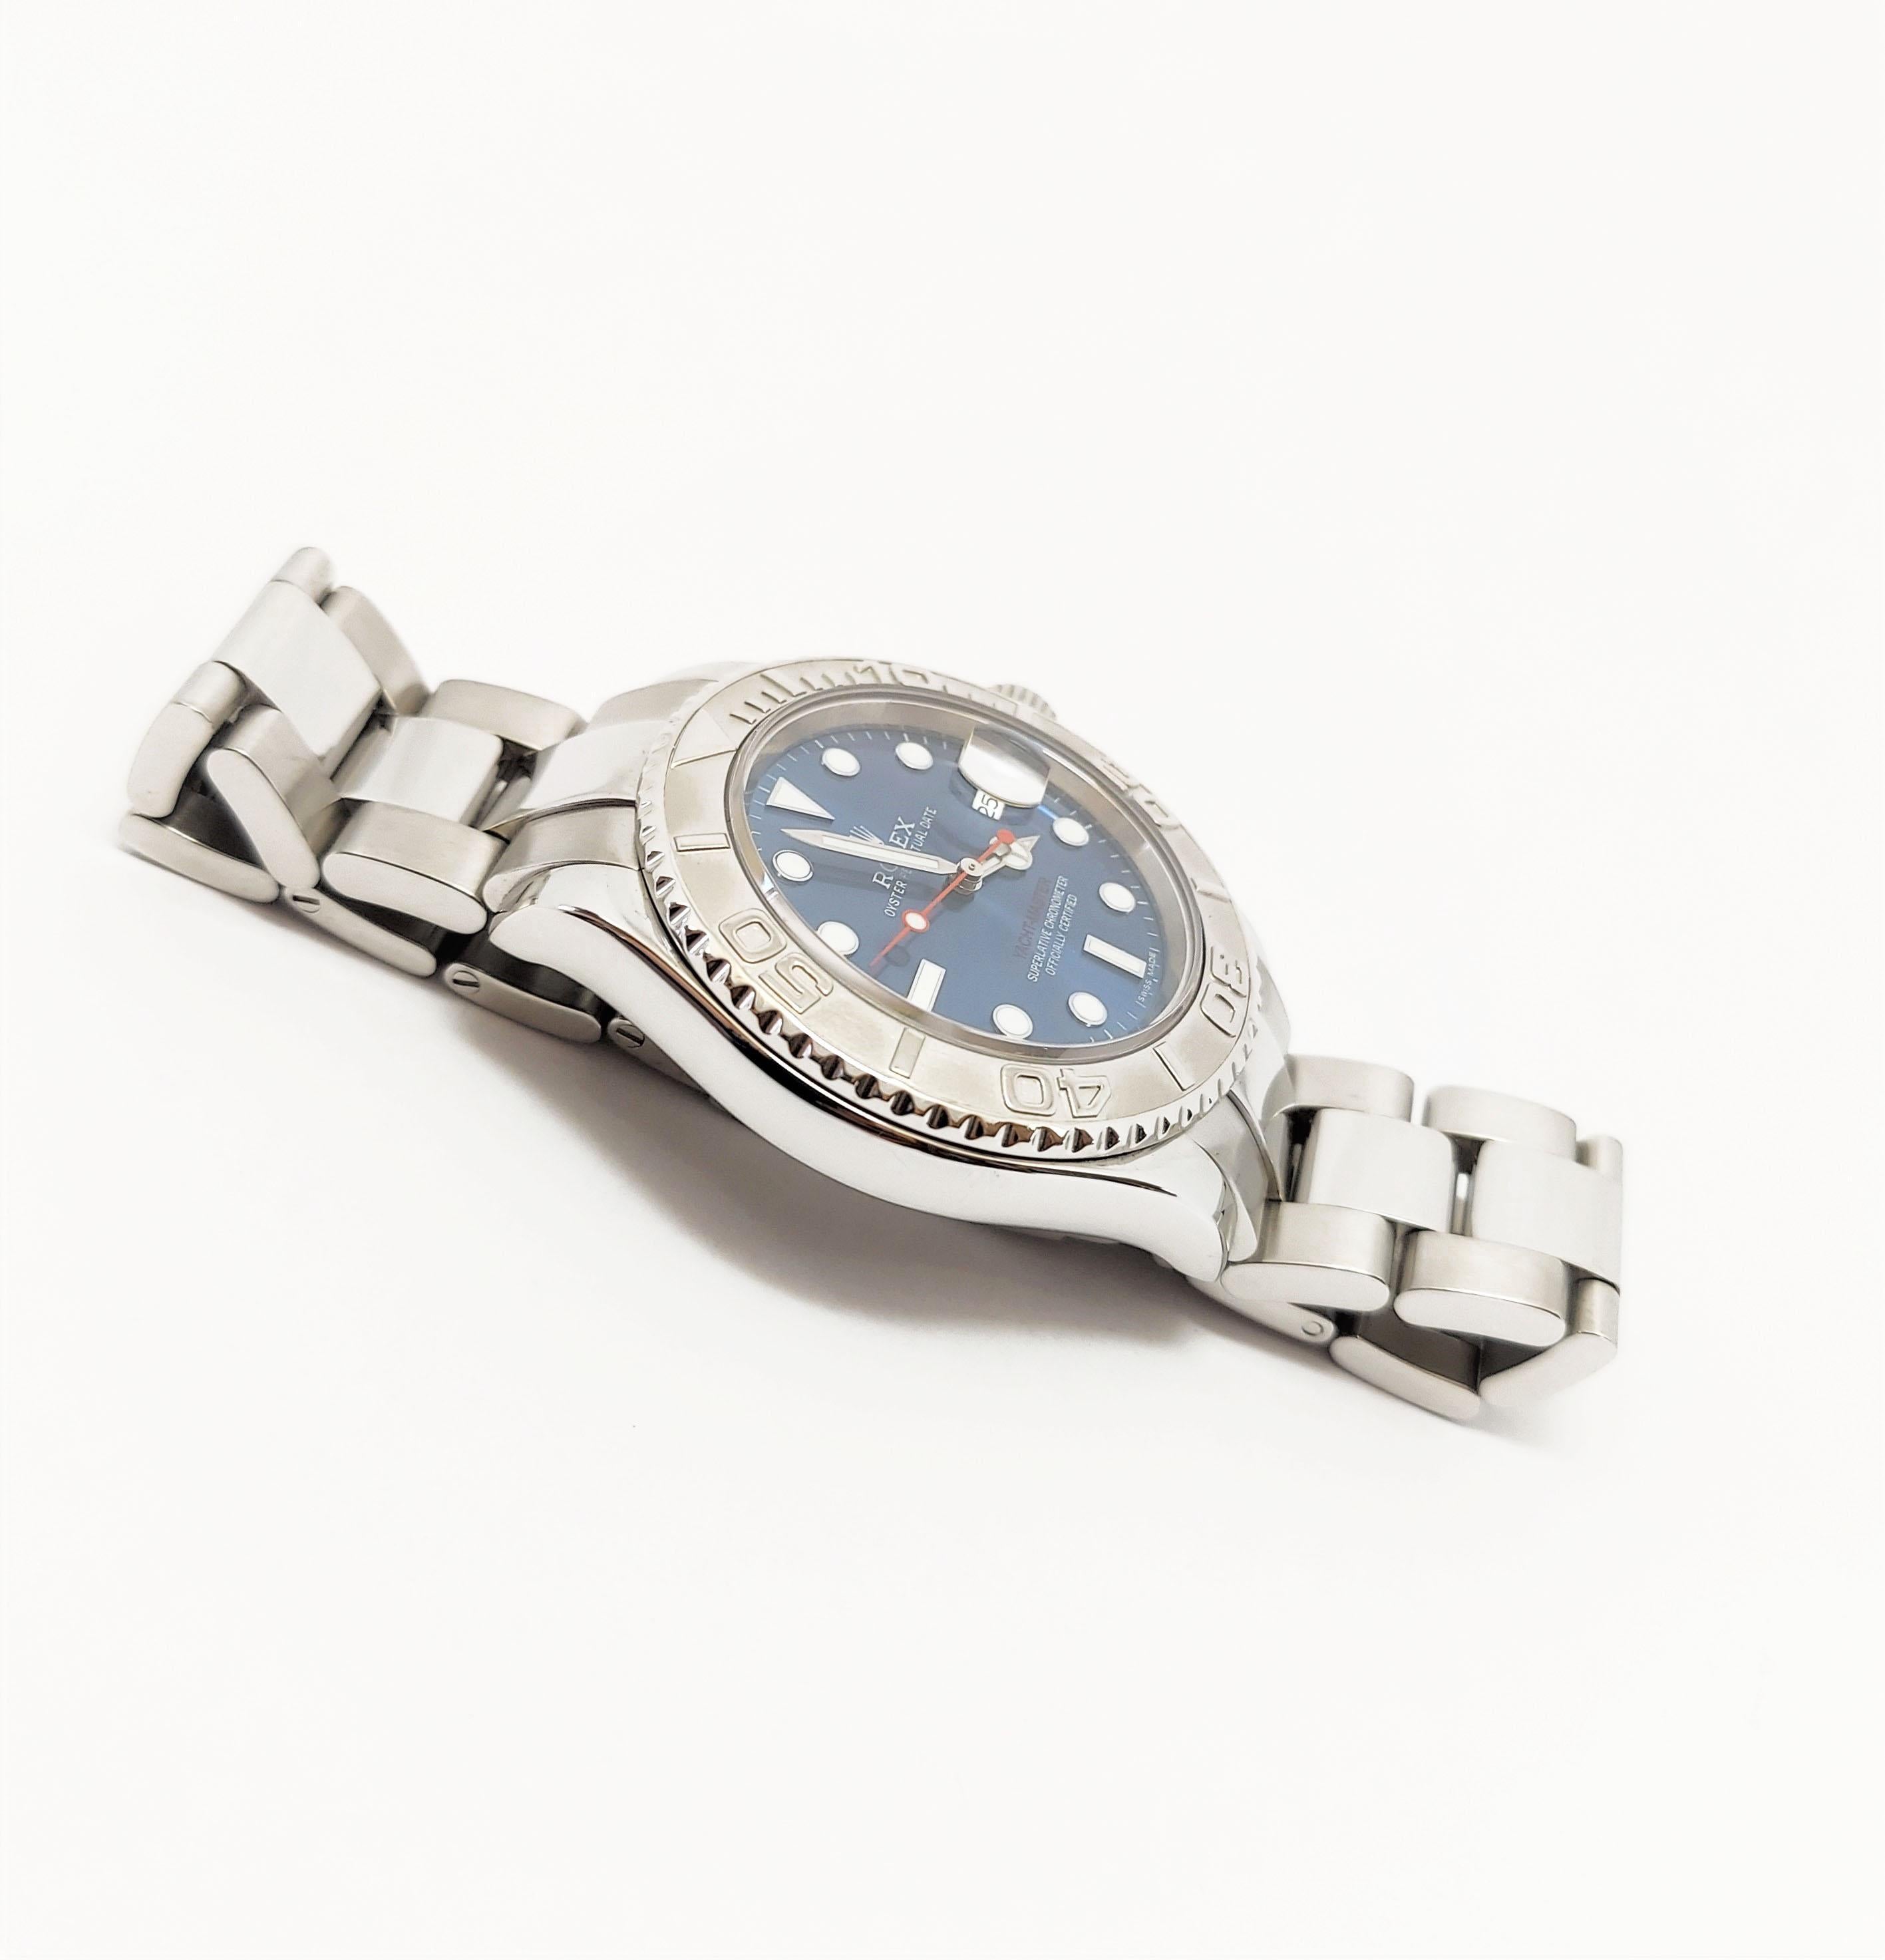 Brand - Rolex
Model - 16622 Yatchmaster
Metals - stainless steel
Case size - 40mm
Bezel -  Rotating Steel
Crystal - Sapphire
Movement - Automatic Rolex cal.3135
Dial - Custom blue 
Wrist band - Rolex oyster steel
Wrist size - 8  inches

Two Year In